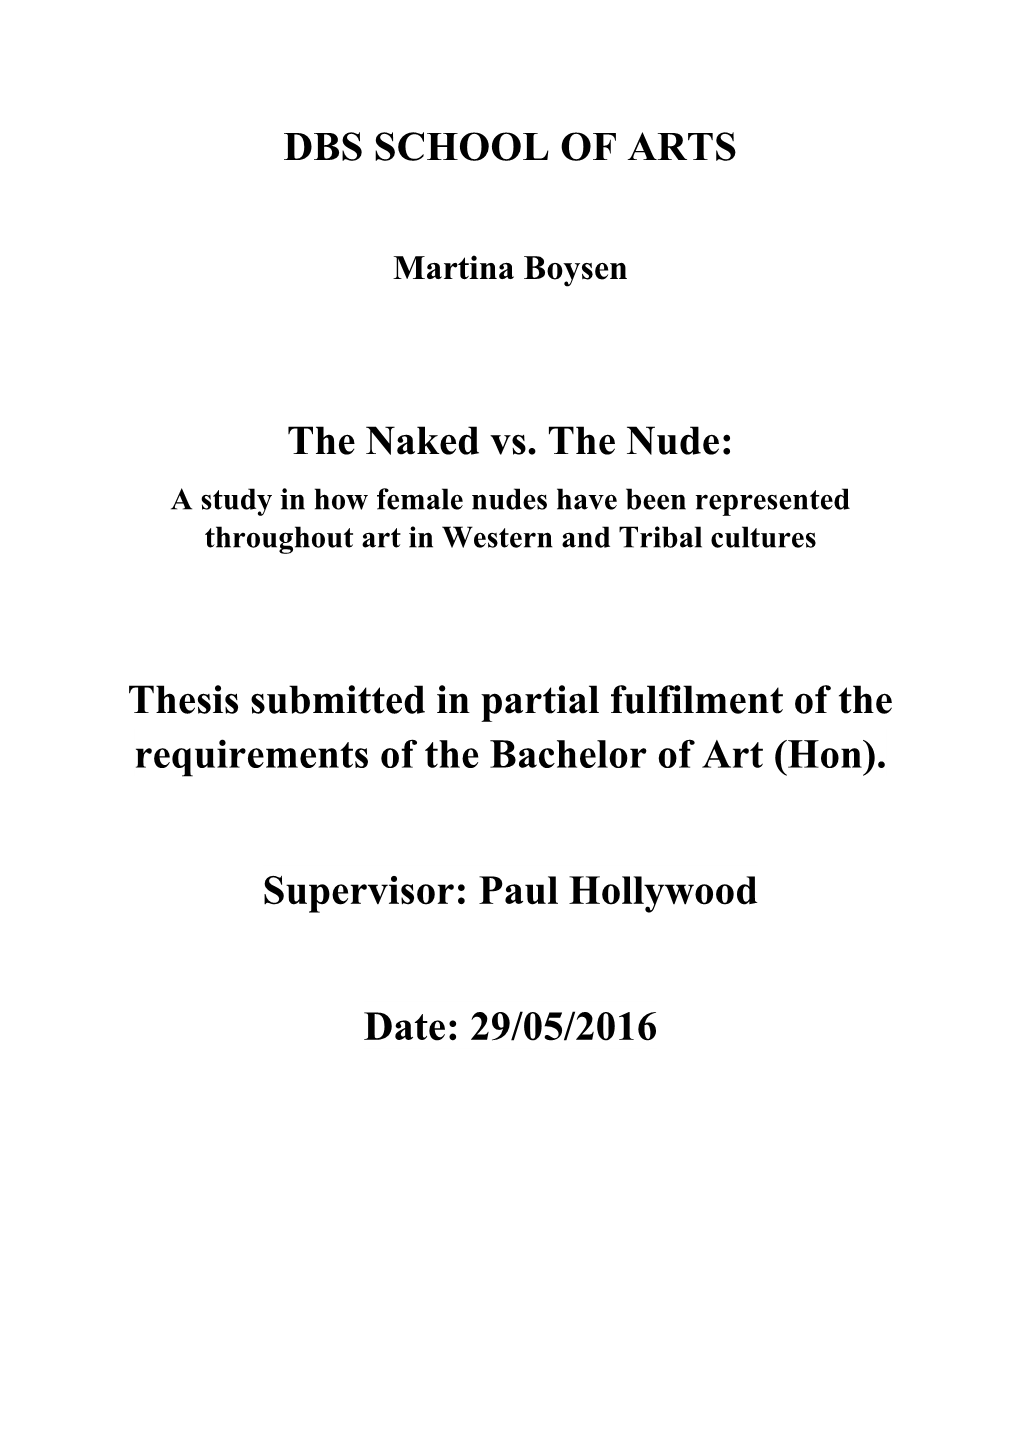 DBS SCHOOL of ARTS the Naked Vs. the Nude: Thesis Submitted In